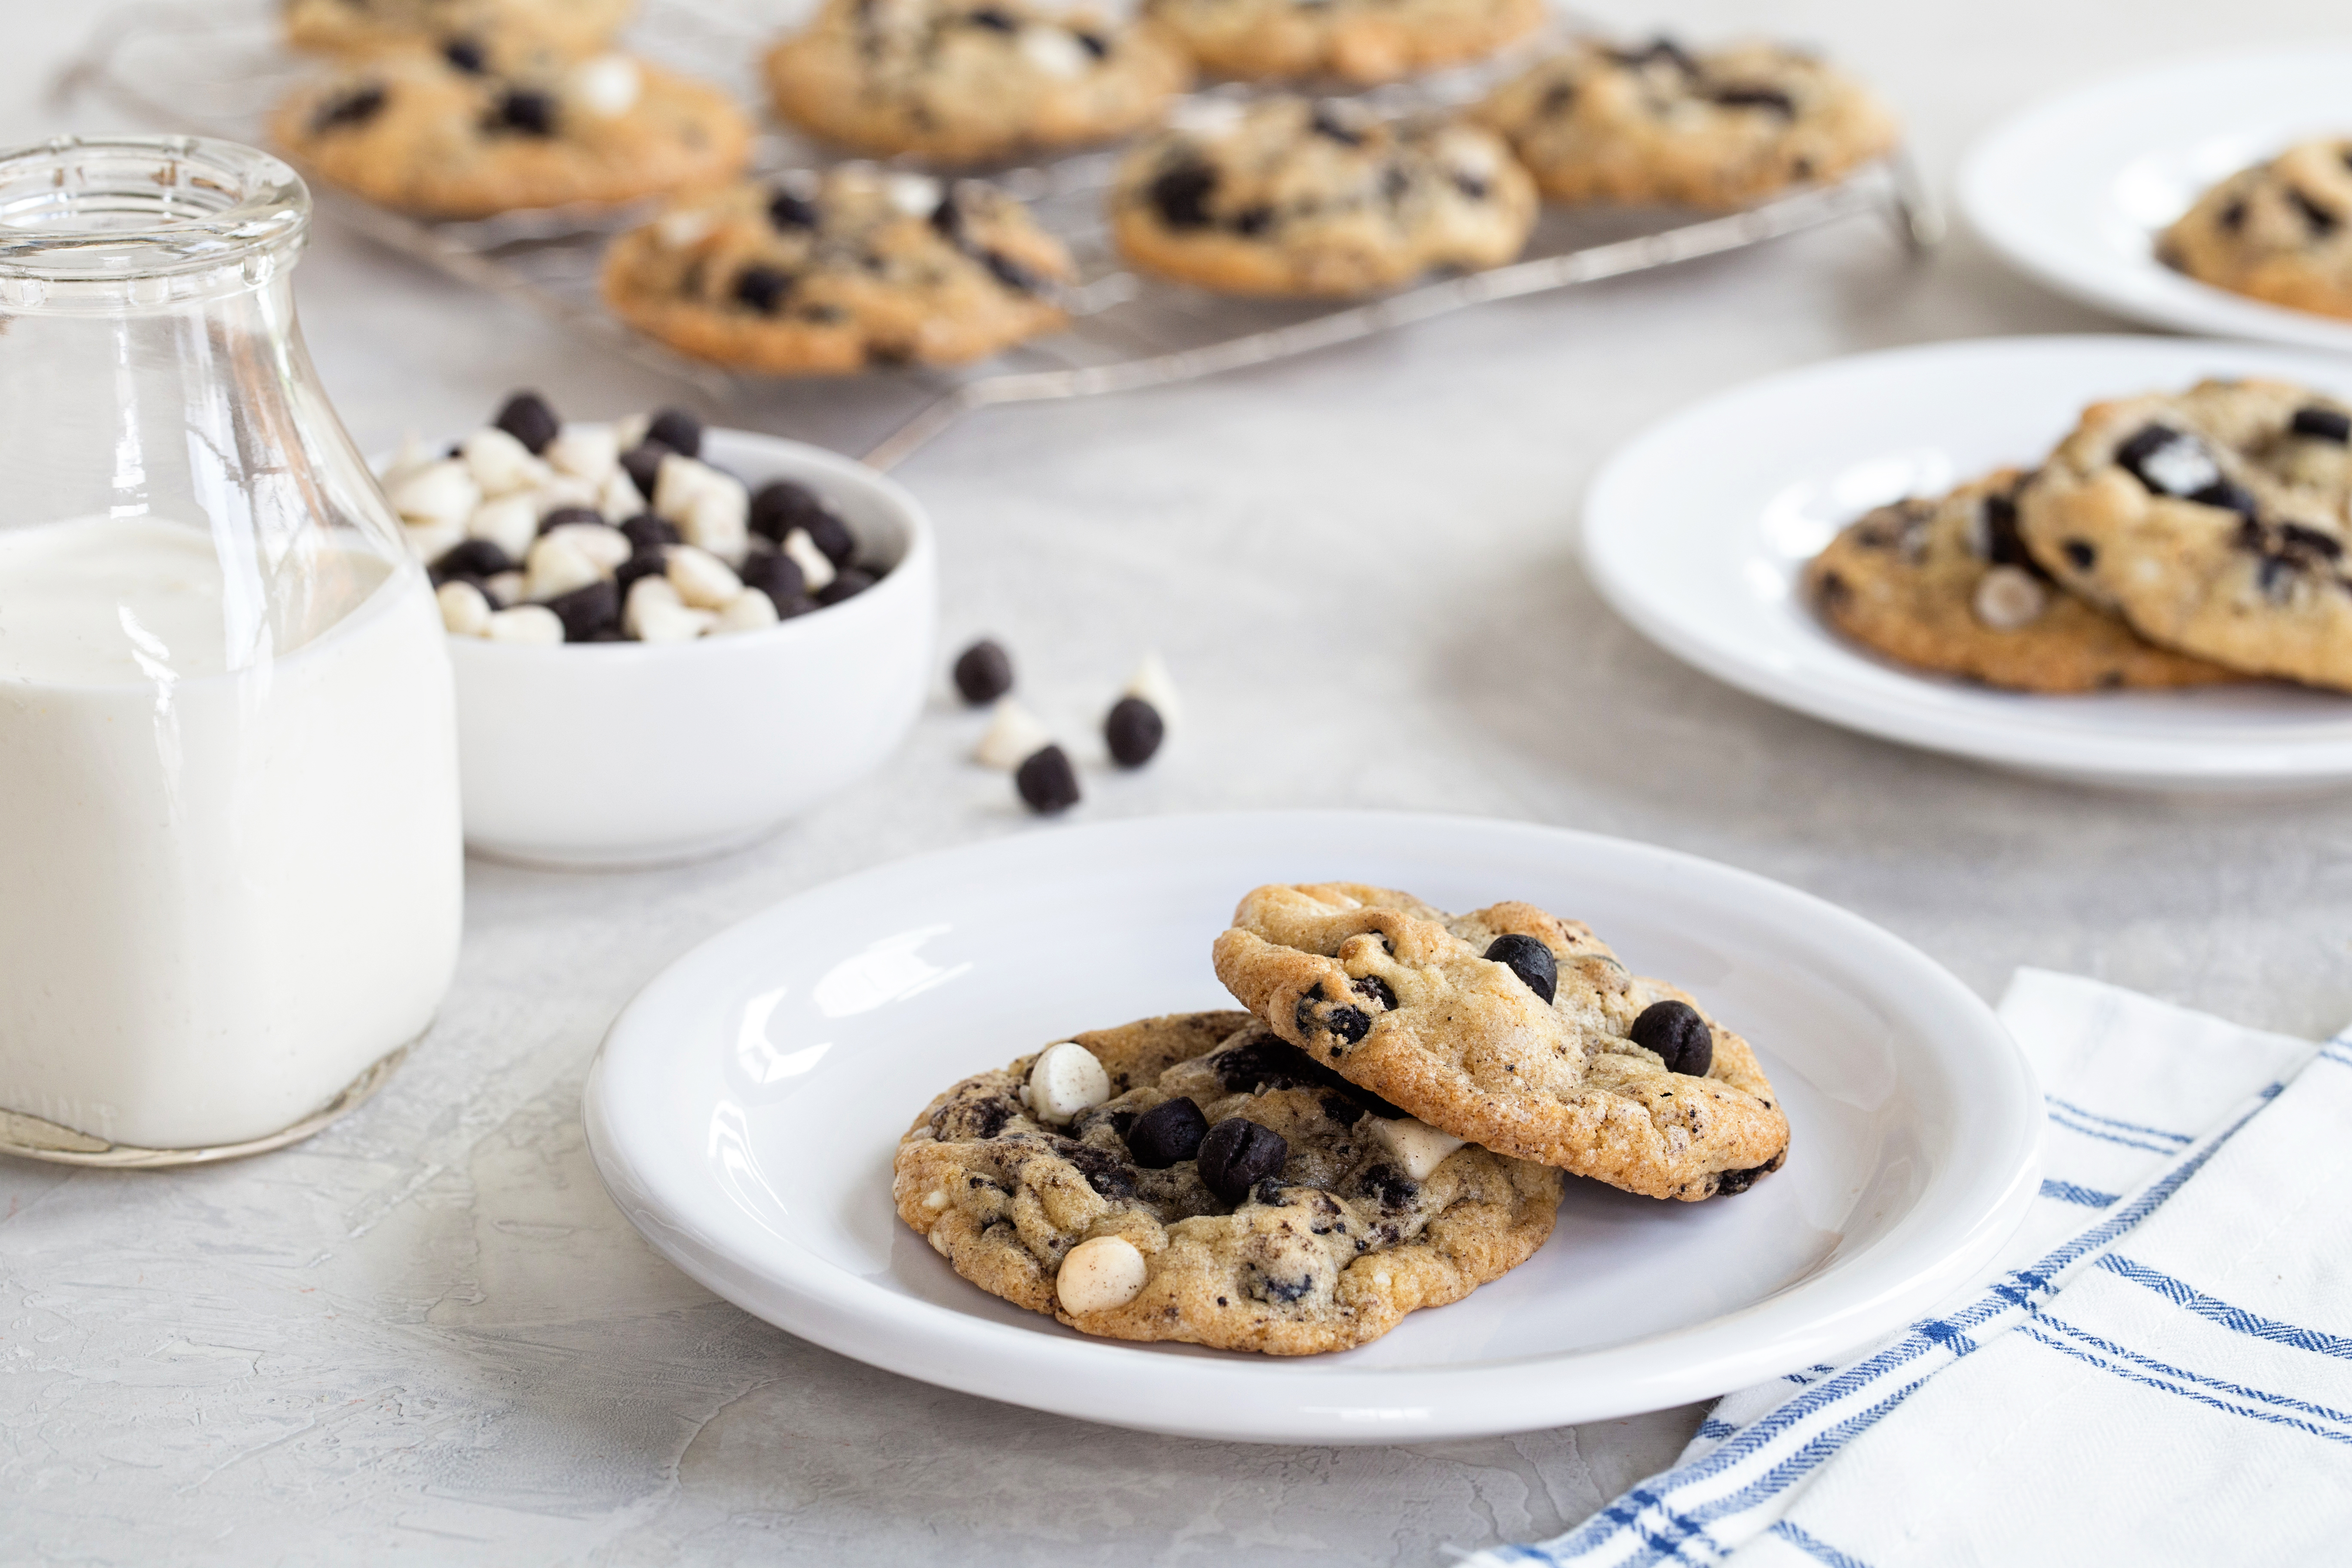 Cookies 'N' Creme Cookies by Hershey's Kitchen in partnership with My Baking Addiction